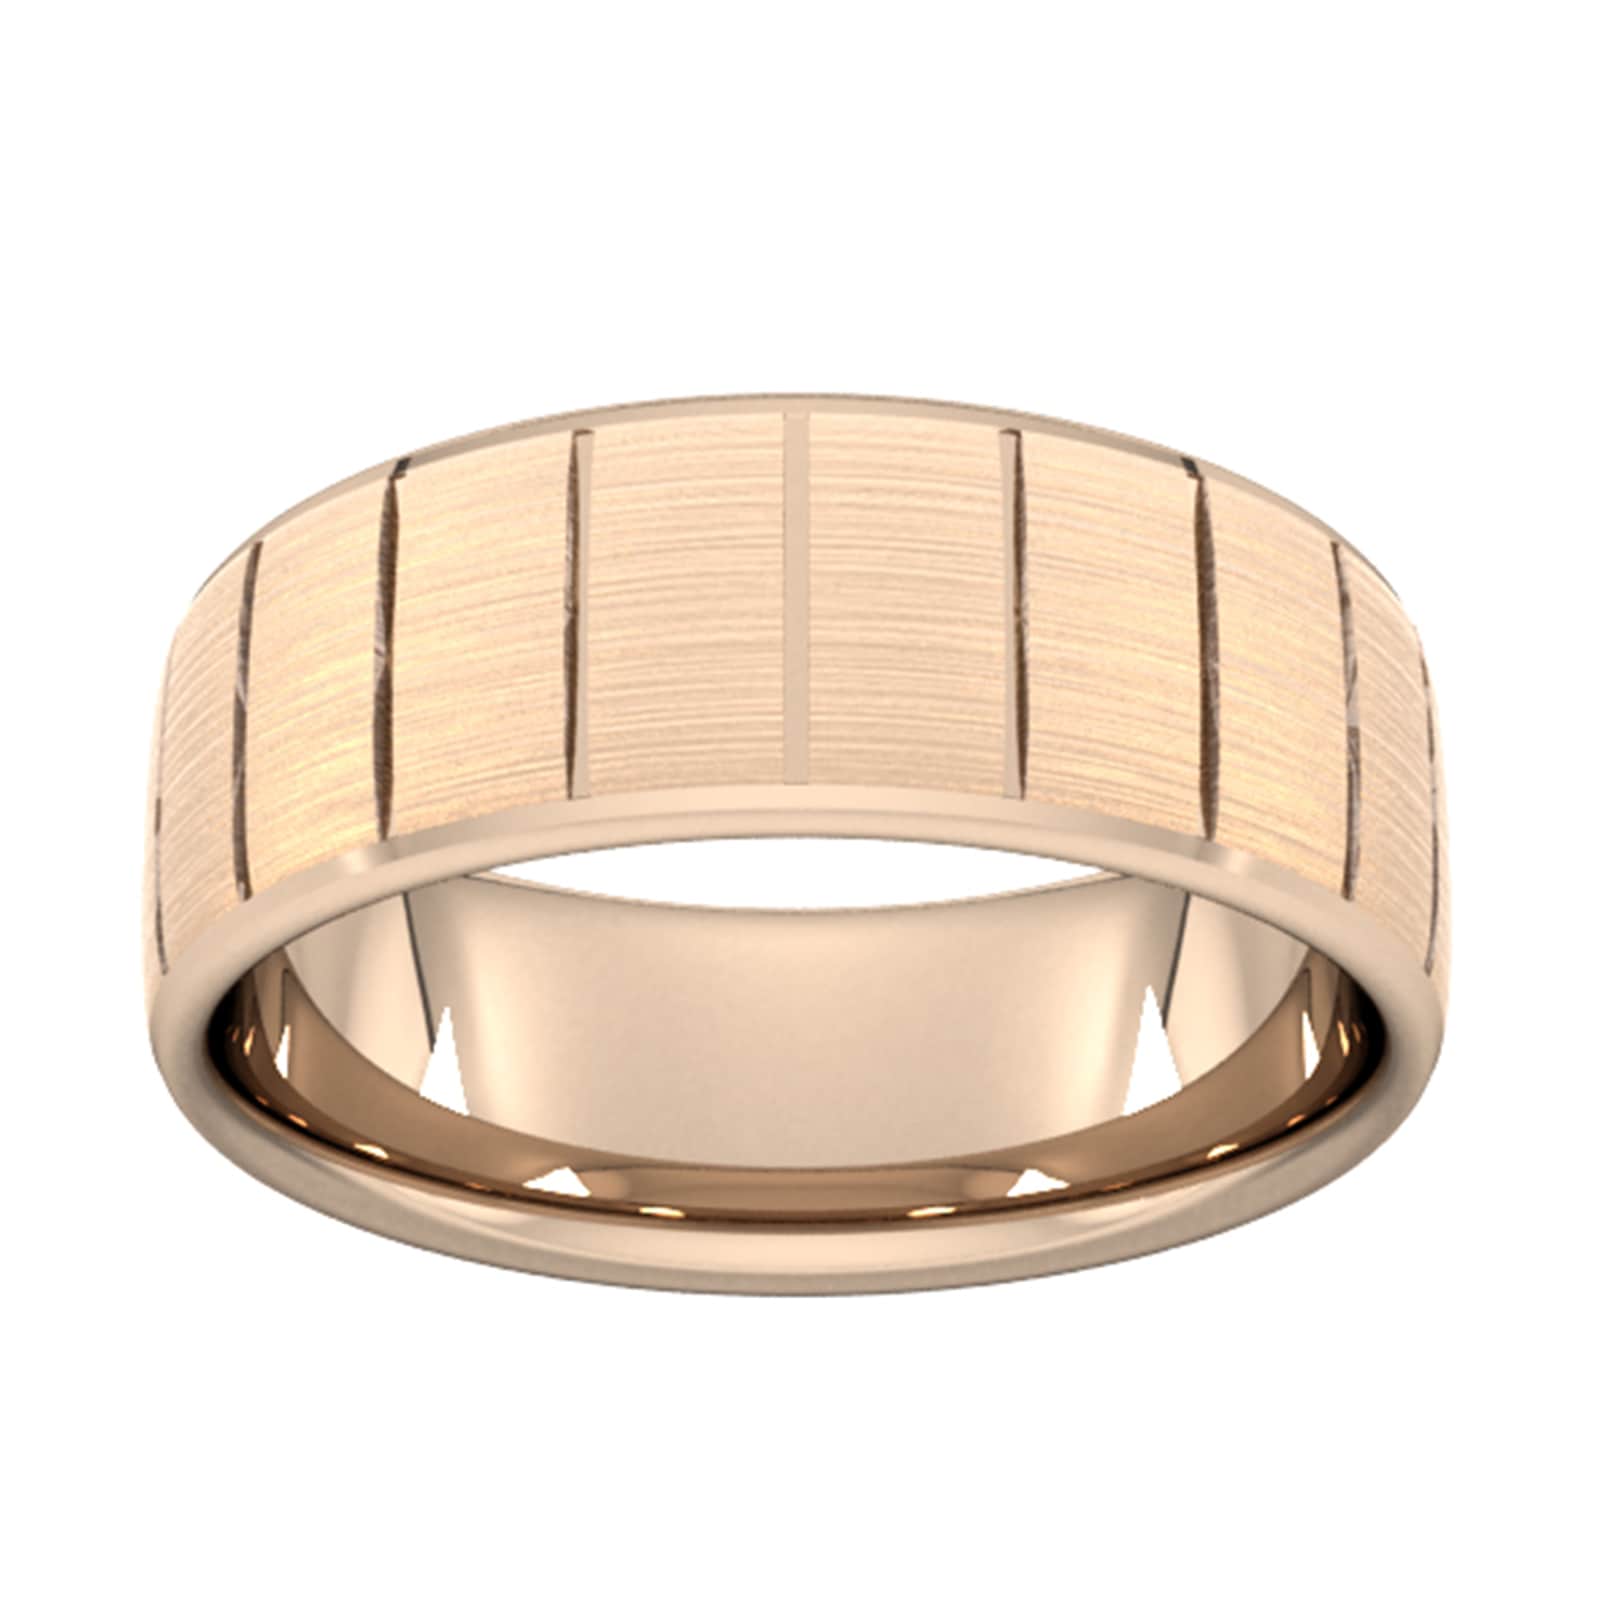 8mm d shape heavy vertical lines wedding ring in 18 carat rose gold - ring size t